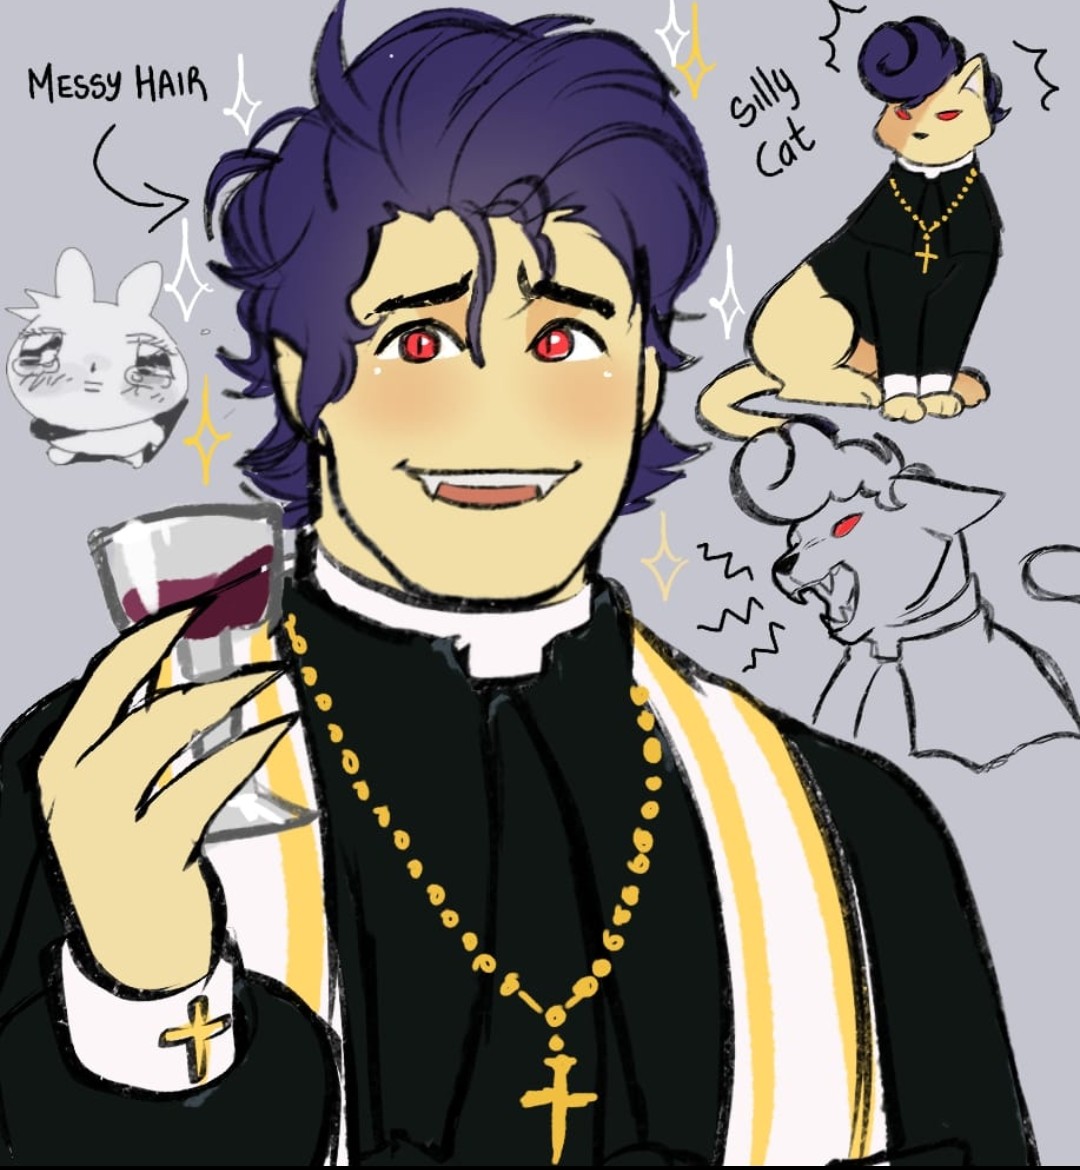 Hey! The priest silly
#WelcomeHomeAU #welcomehomepuppetshow #Welcomehome #WallyDarling #WallyDarlingAU 
(AU by: @/relish)